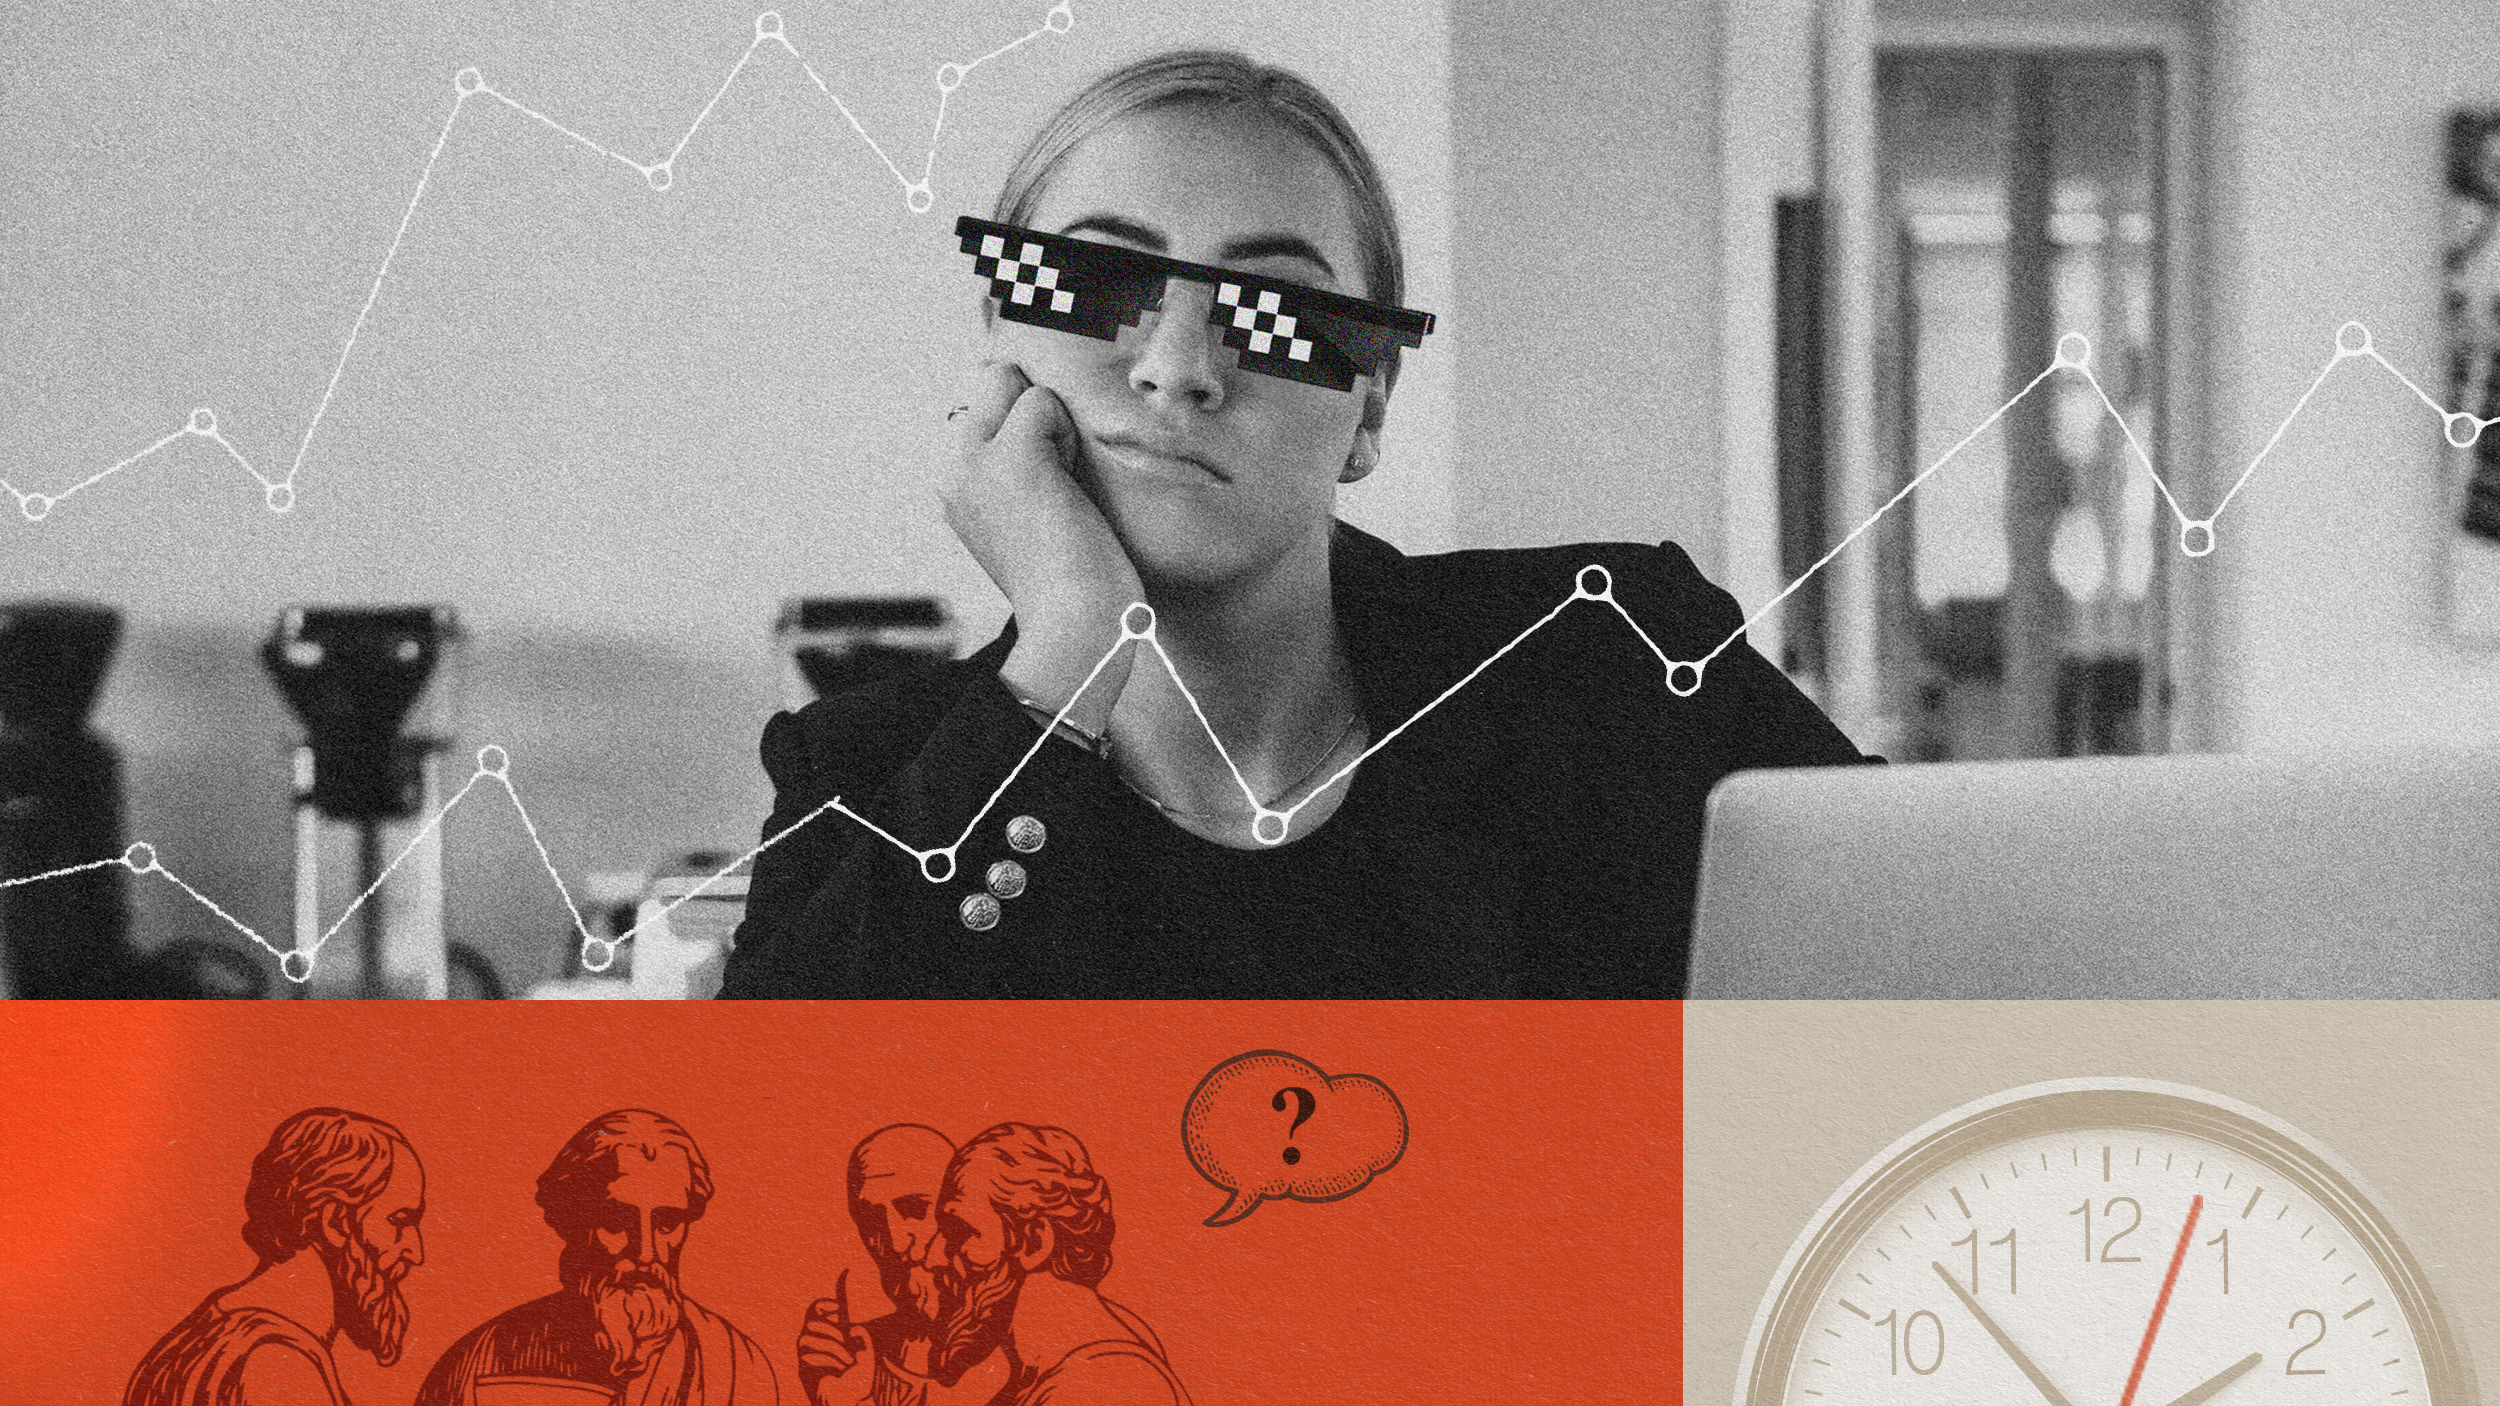 Woman wearing pixelated sunglasses sits at a desk, with graphic overlays of a line graph demonstrating workplace equality, classical figures in discussion, and a clock indicating 2 o'clock.